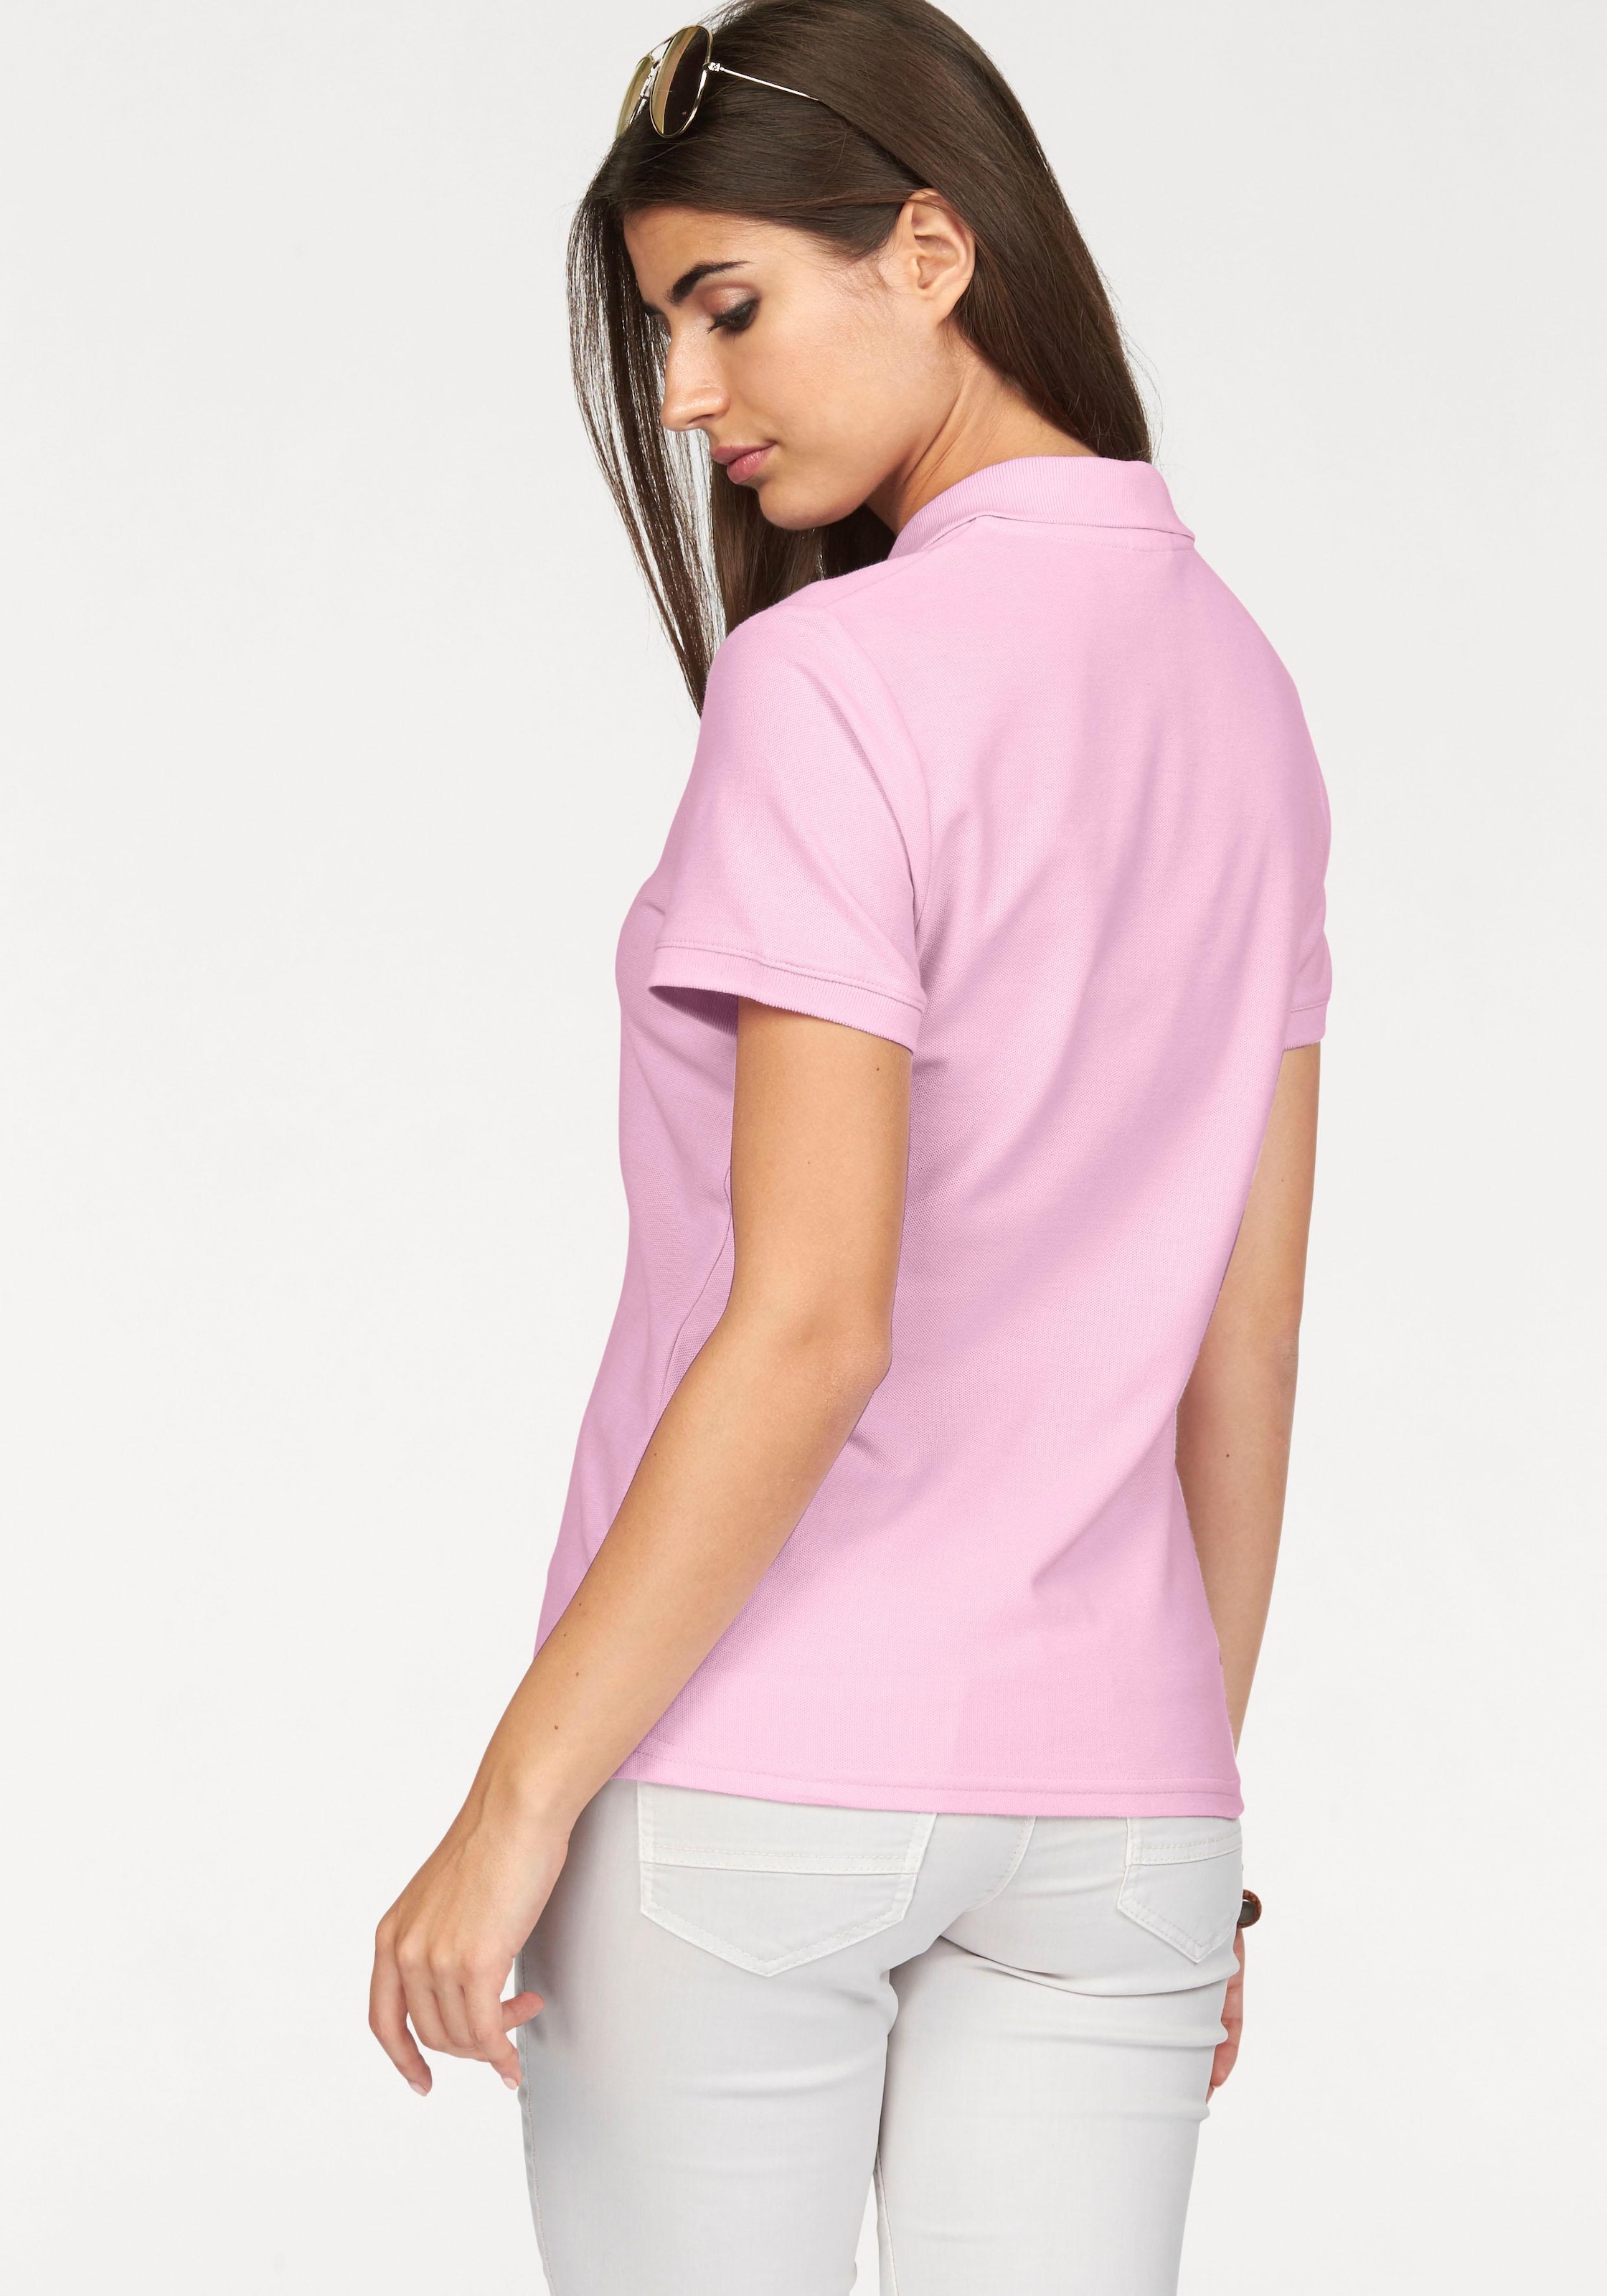 Fruit Premium the online Polo« »Lady-Fit OTTO bei Loom of Poloshirt